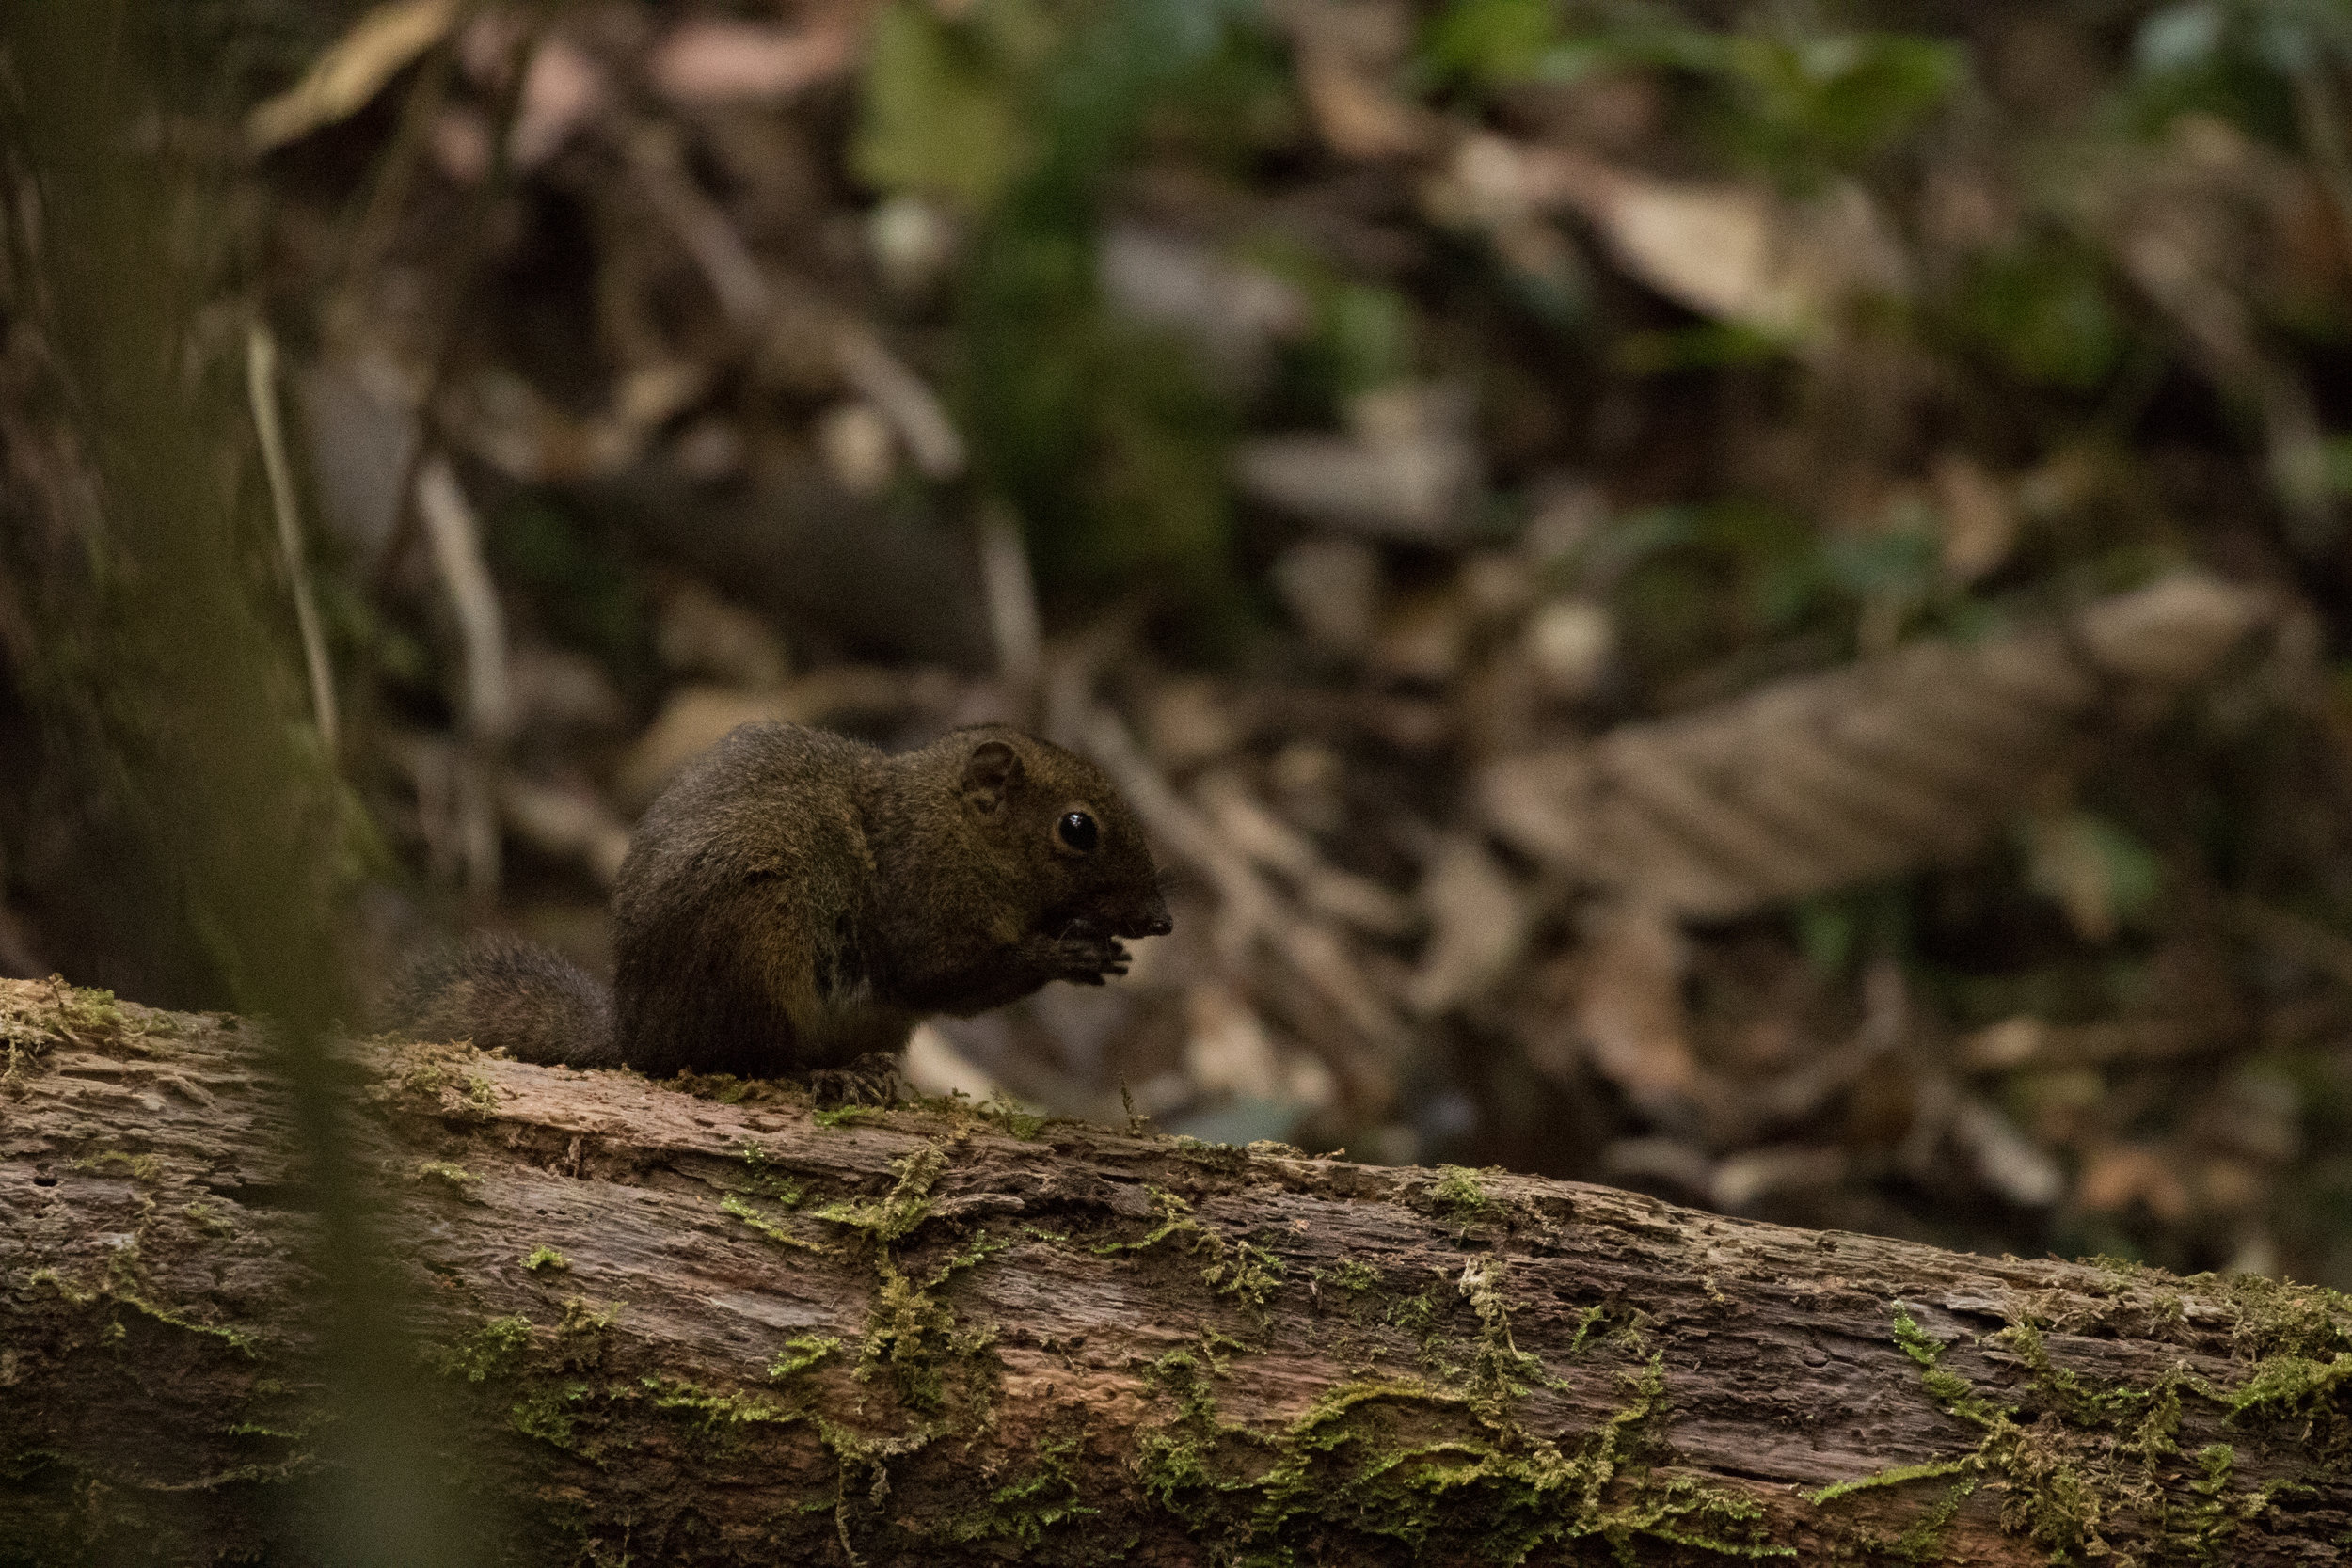  One of Mount Kinabalu's many rodents, who like to find bird nests as much as we do 